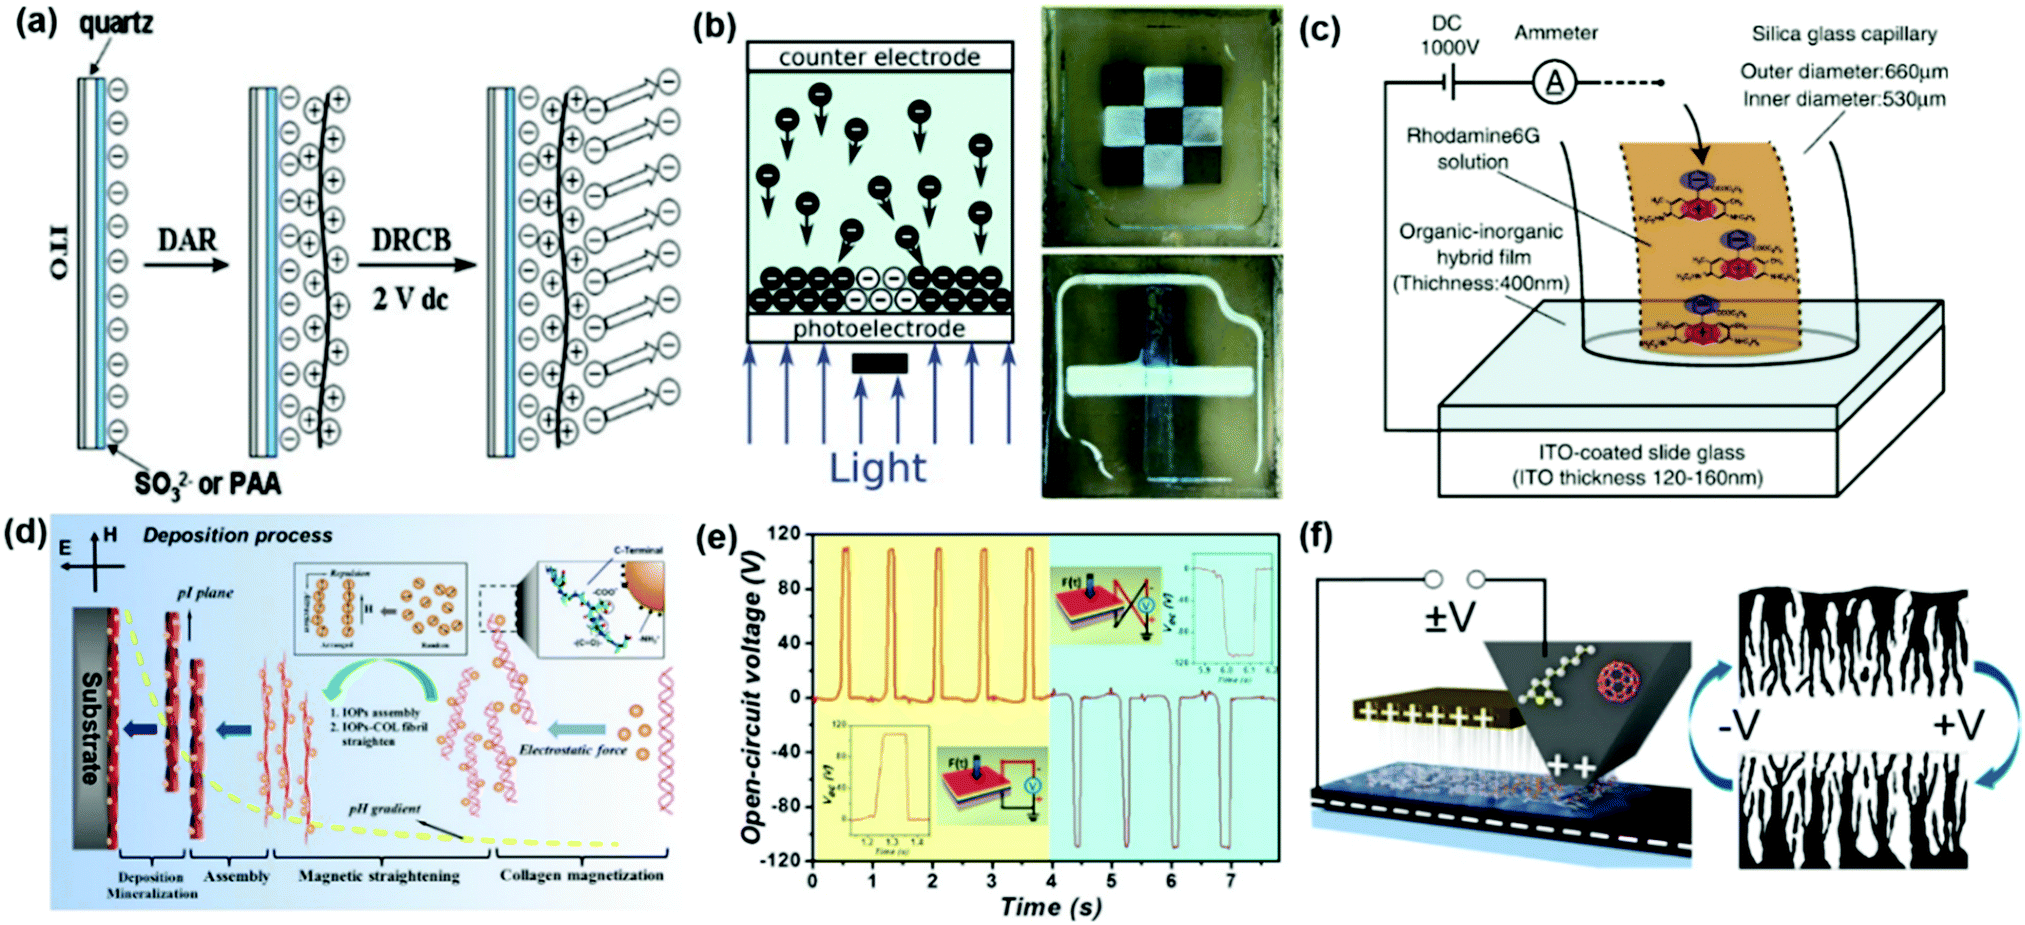 Overview of electric-field-induced deposition technology in 